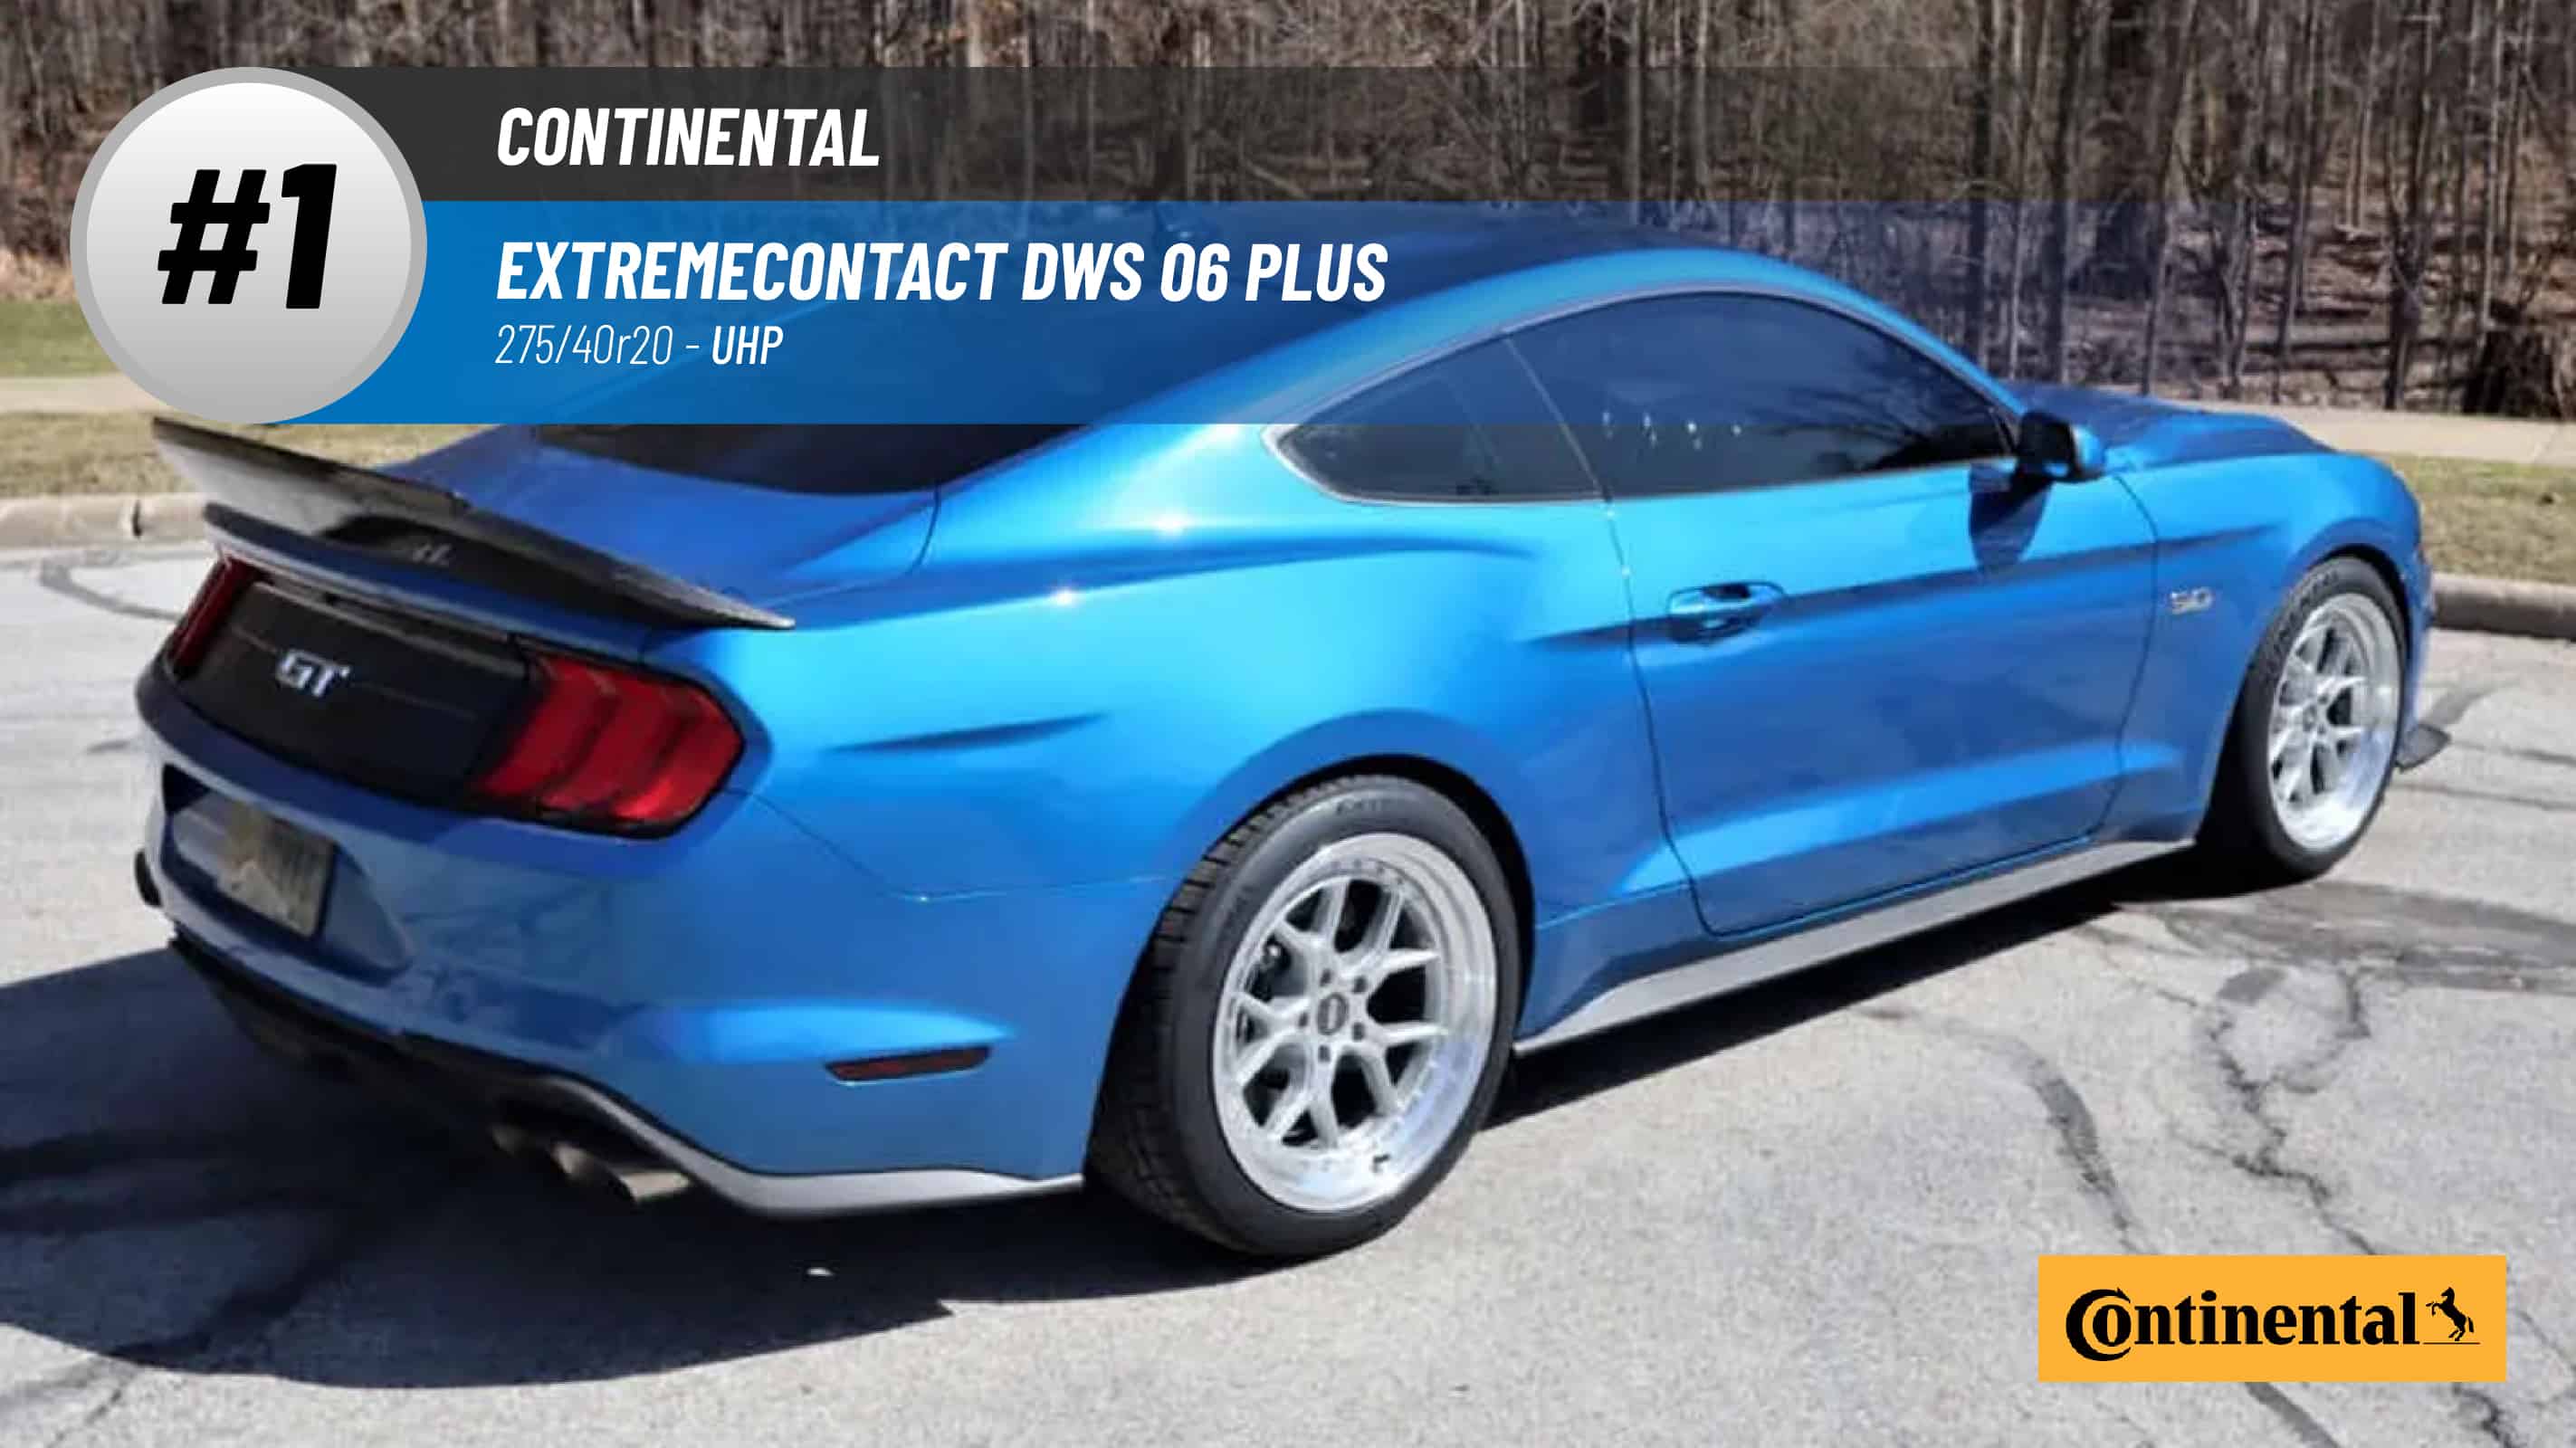 Top #1 UHP Tires: Continental ExtremeContact DWS 06 Plus – 275/40 R20